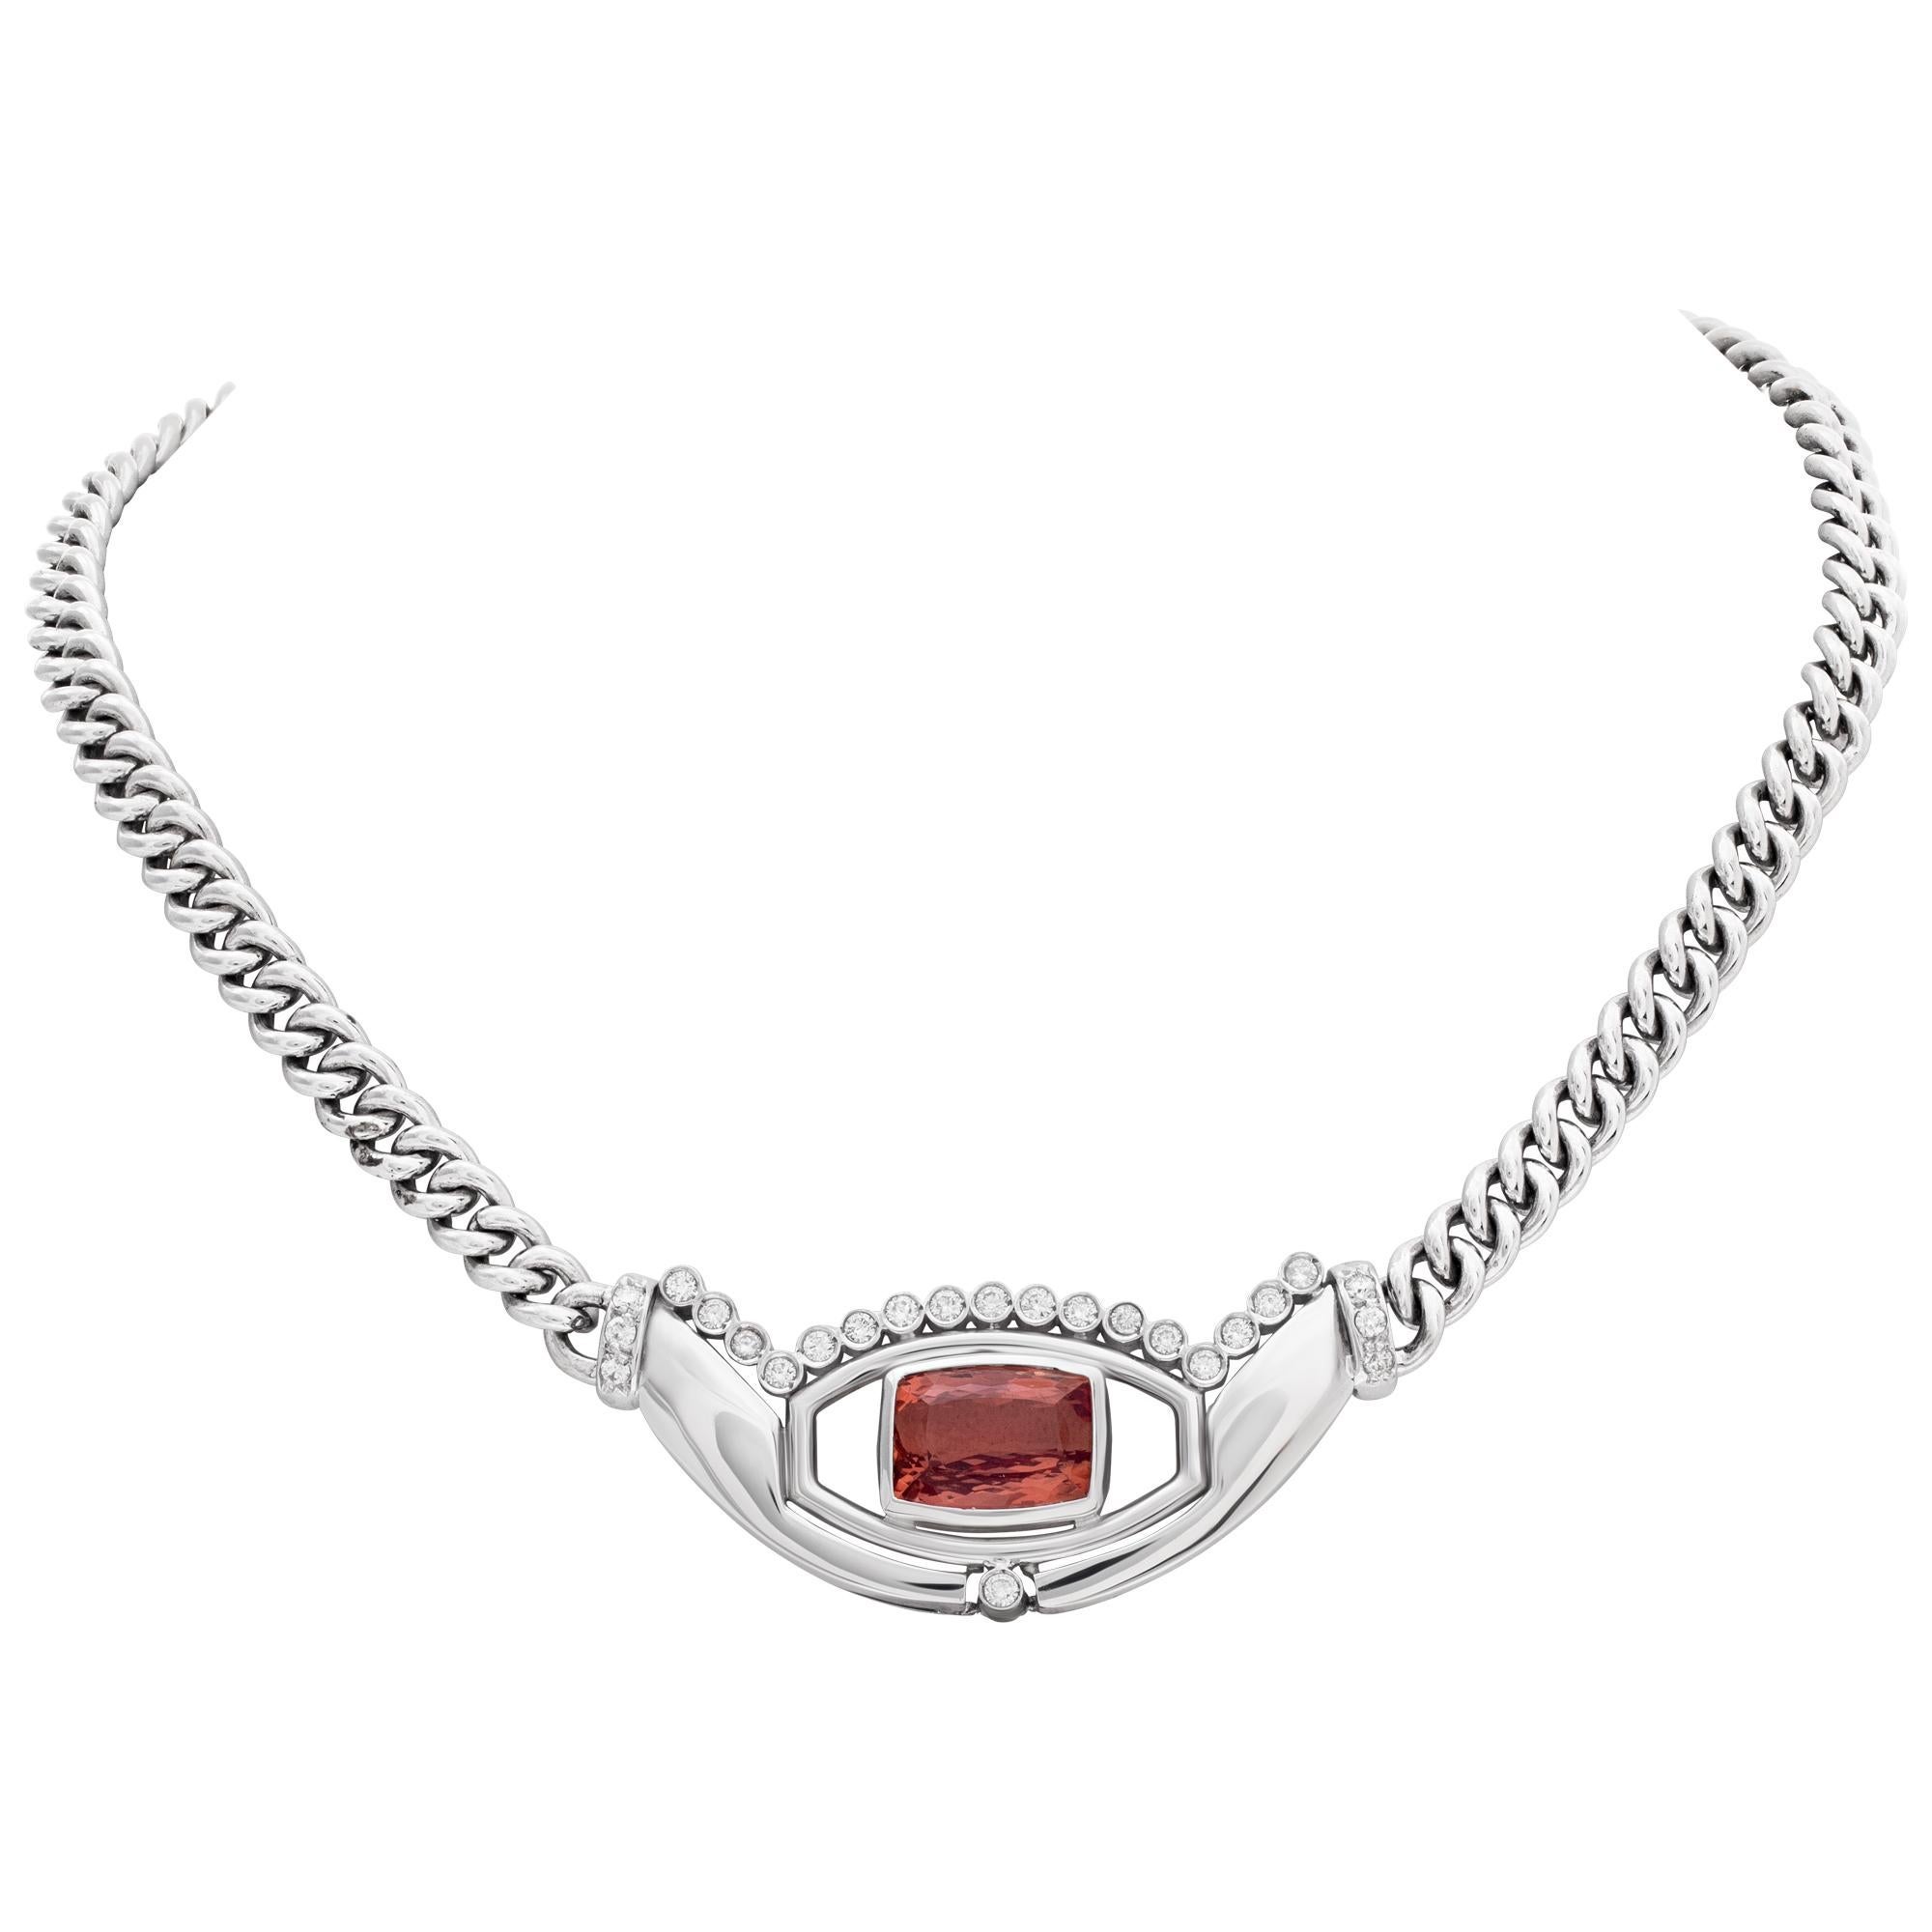 Imperial Topaz and Diamond Necklace in 18k White Gold